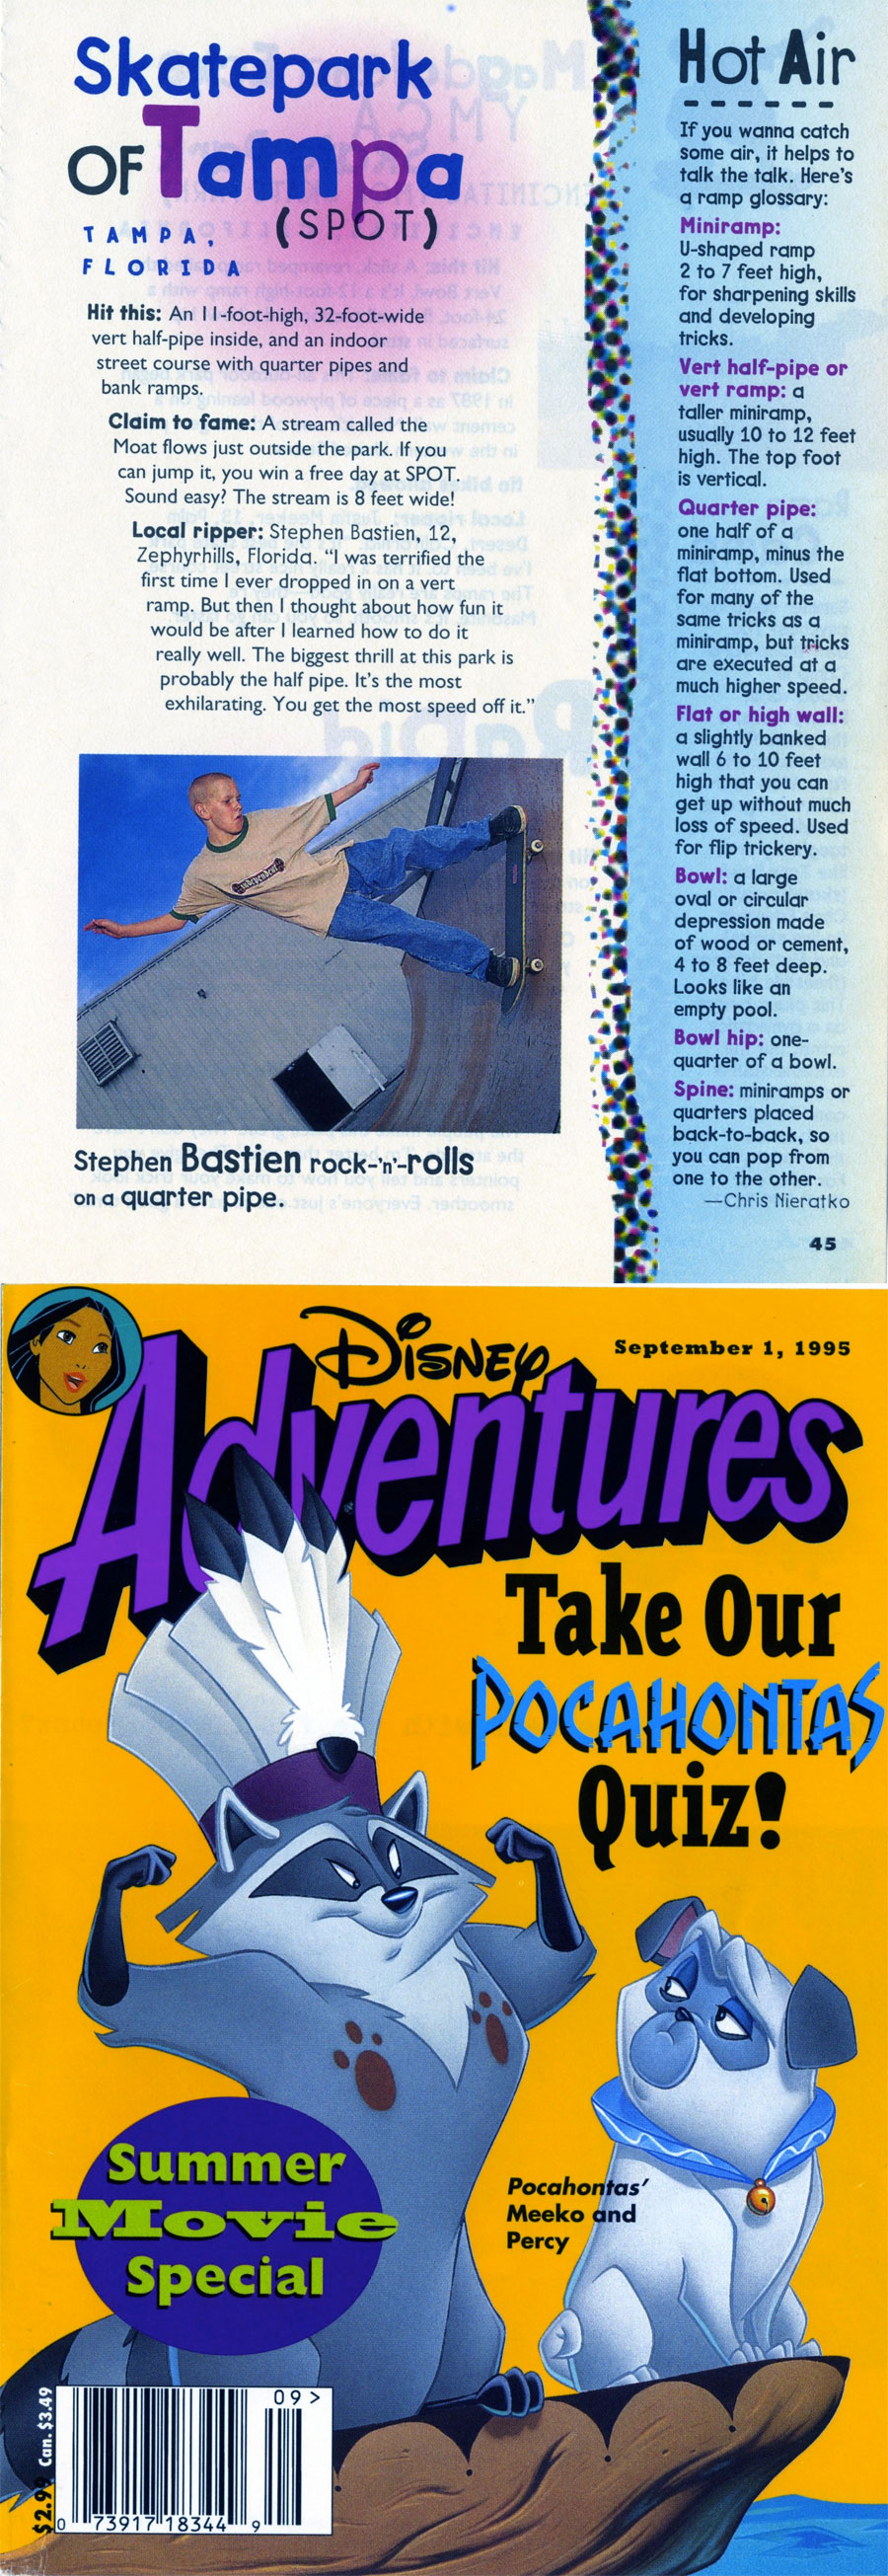 Skateboarding and SPoT Explained by Disney Mag